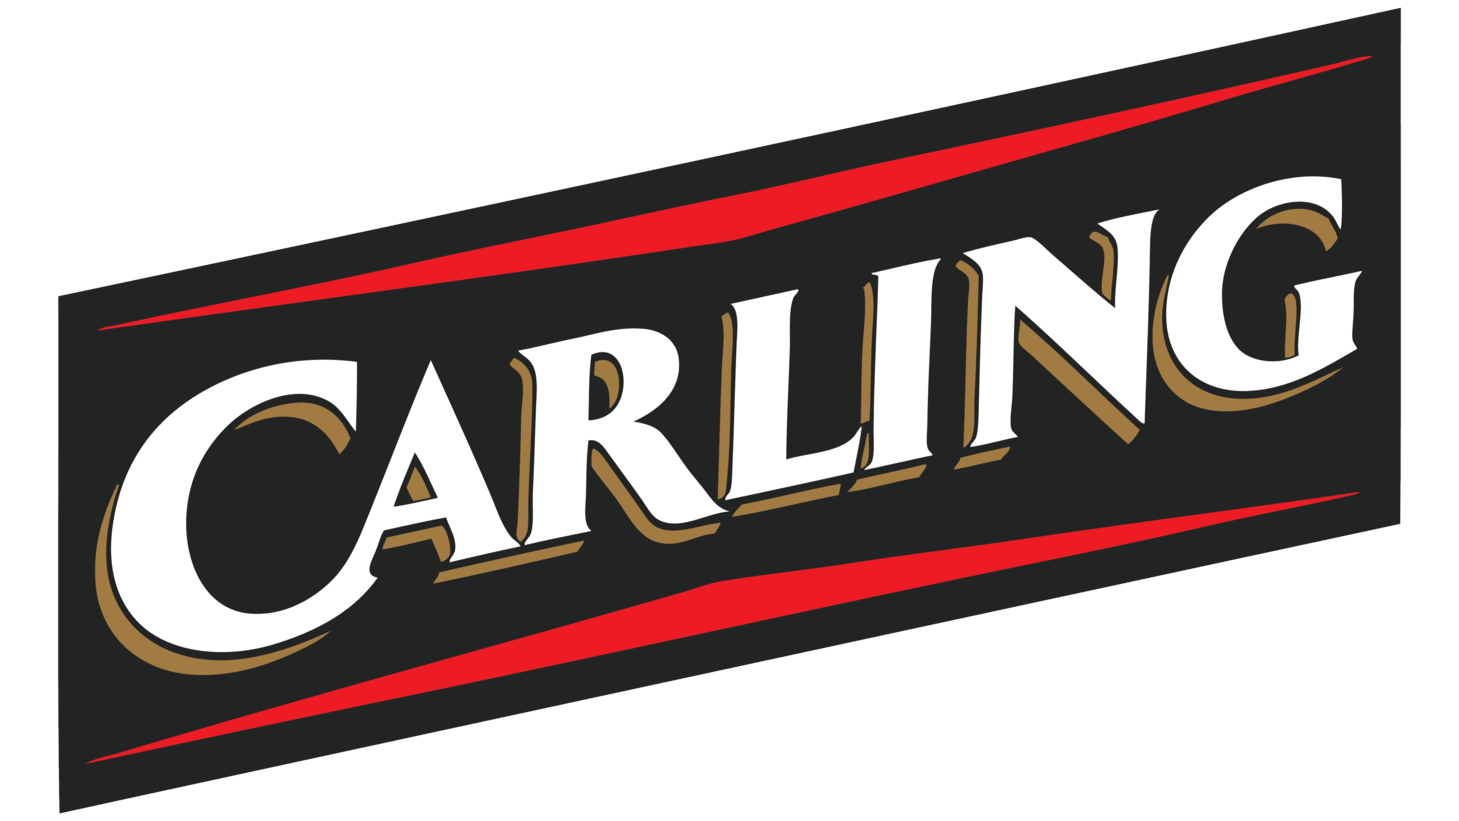 Carling sign 1990s 2011